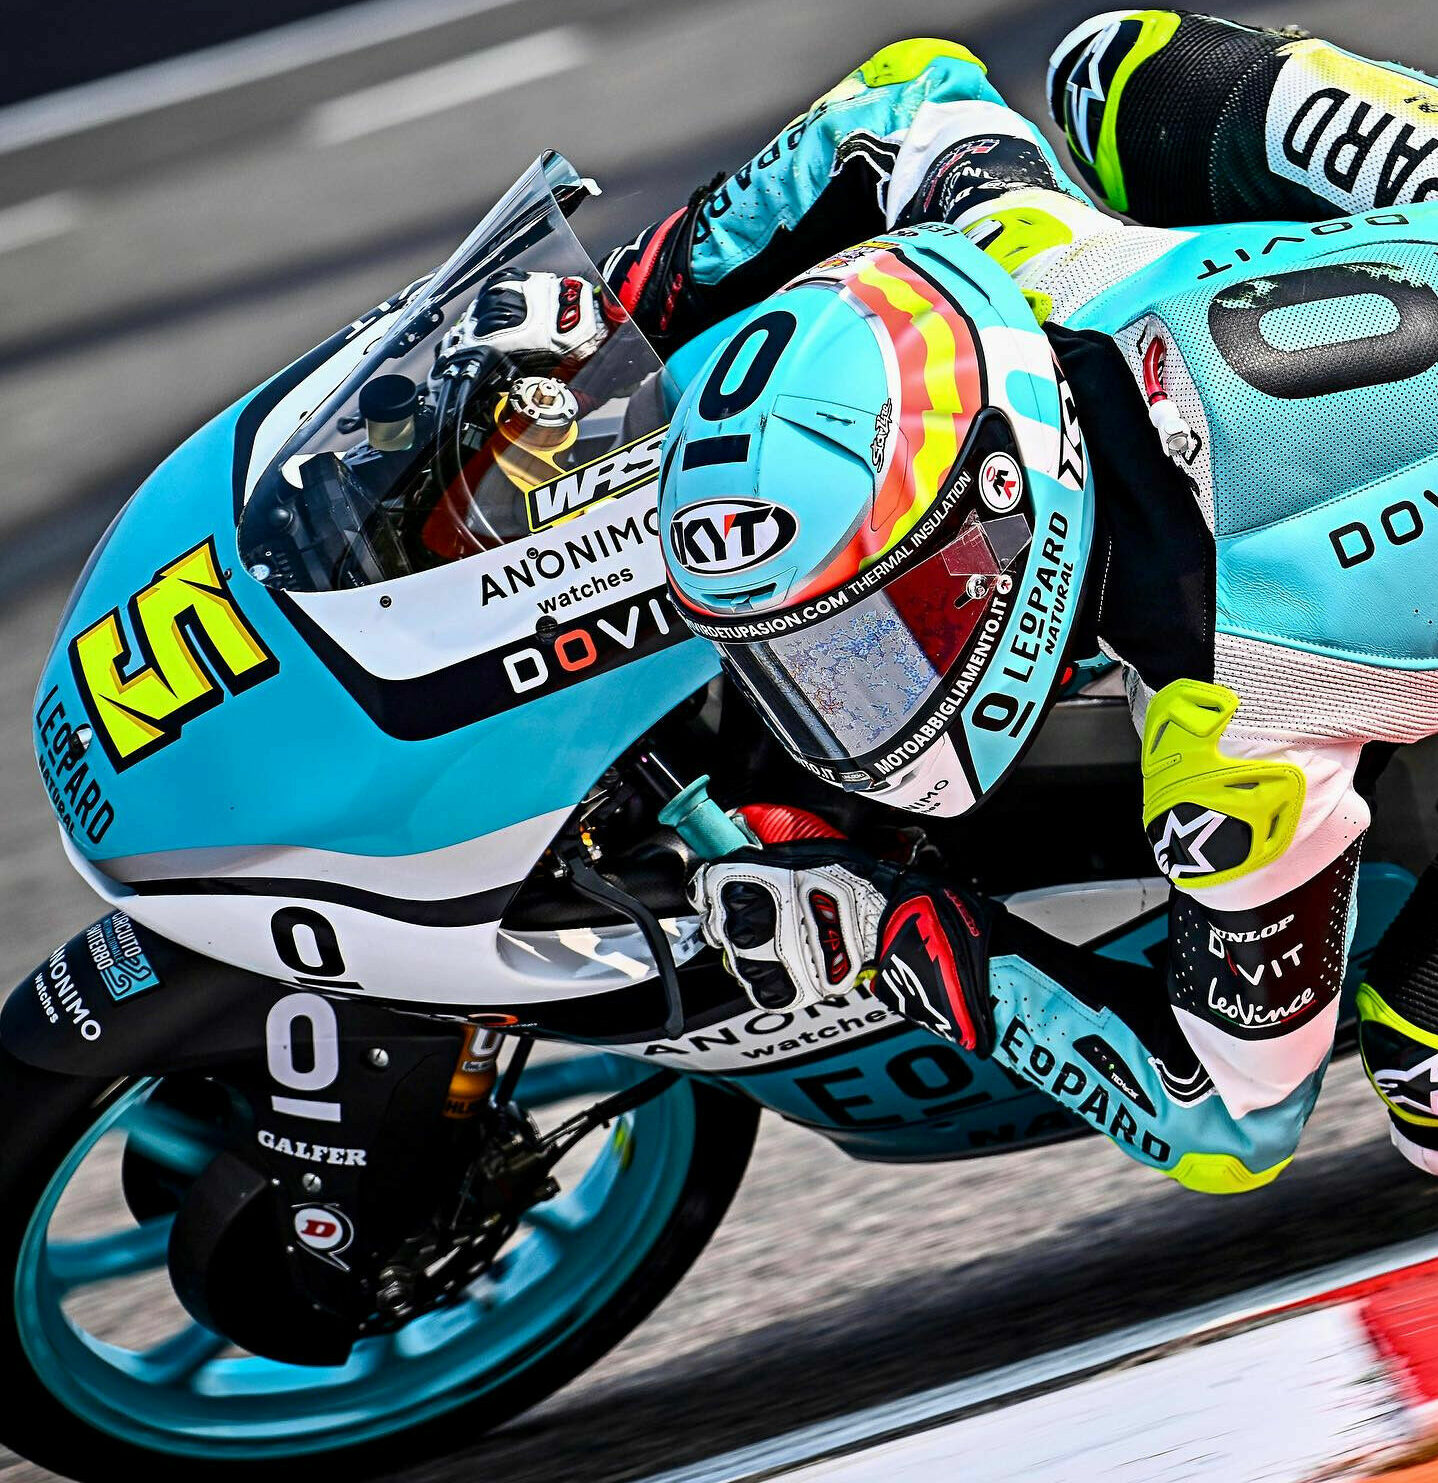 Moto3: Masia Claims Pole Position In The Wet In India - Roadracing ...